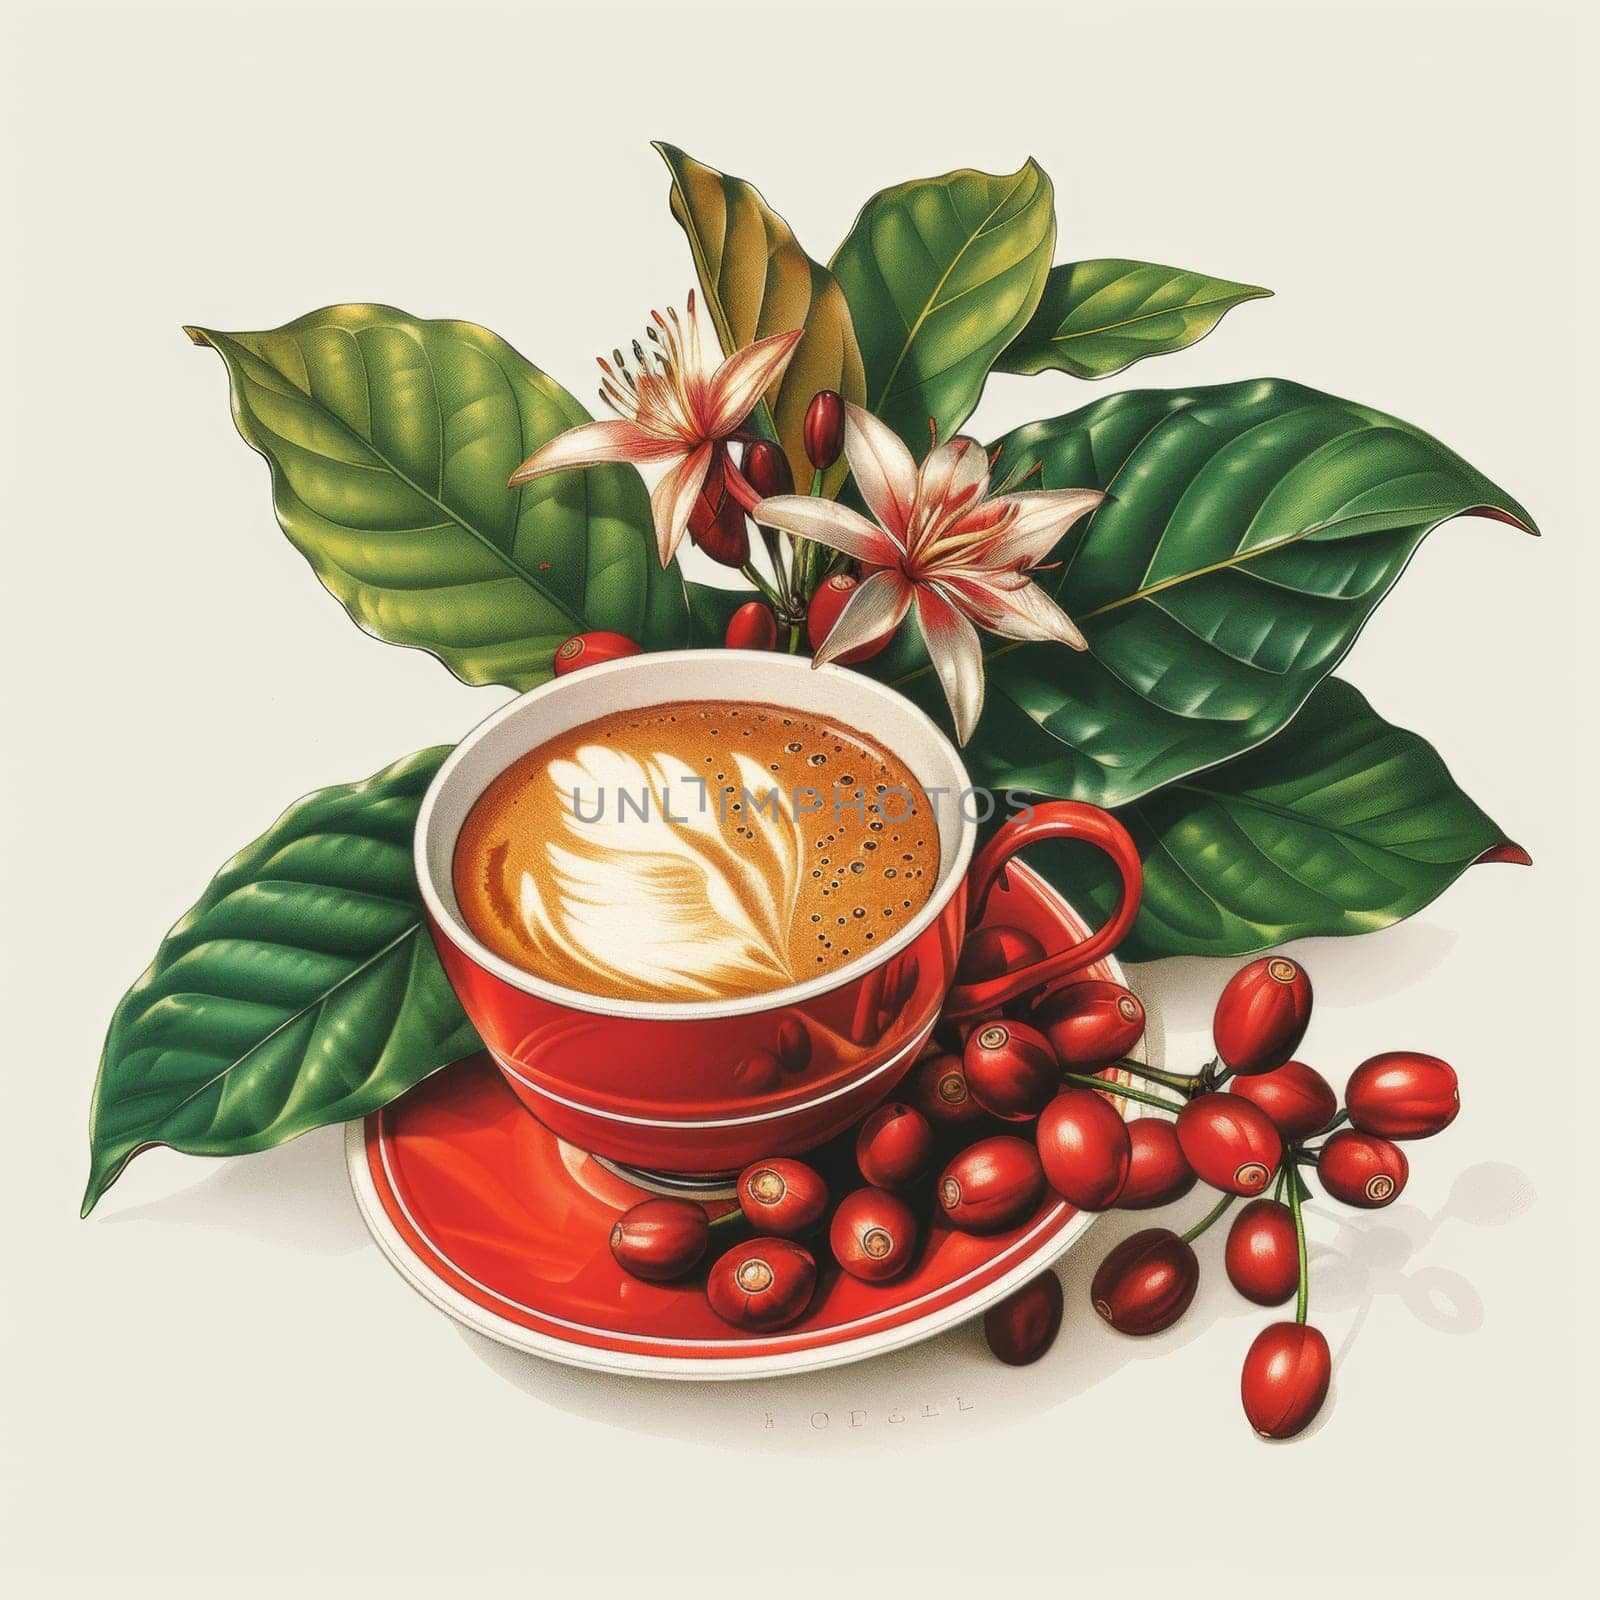 A cup of coffee with a red lid and leaves